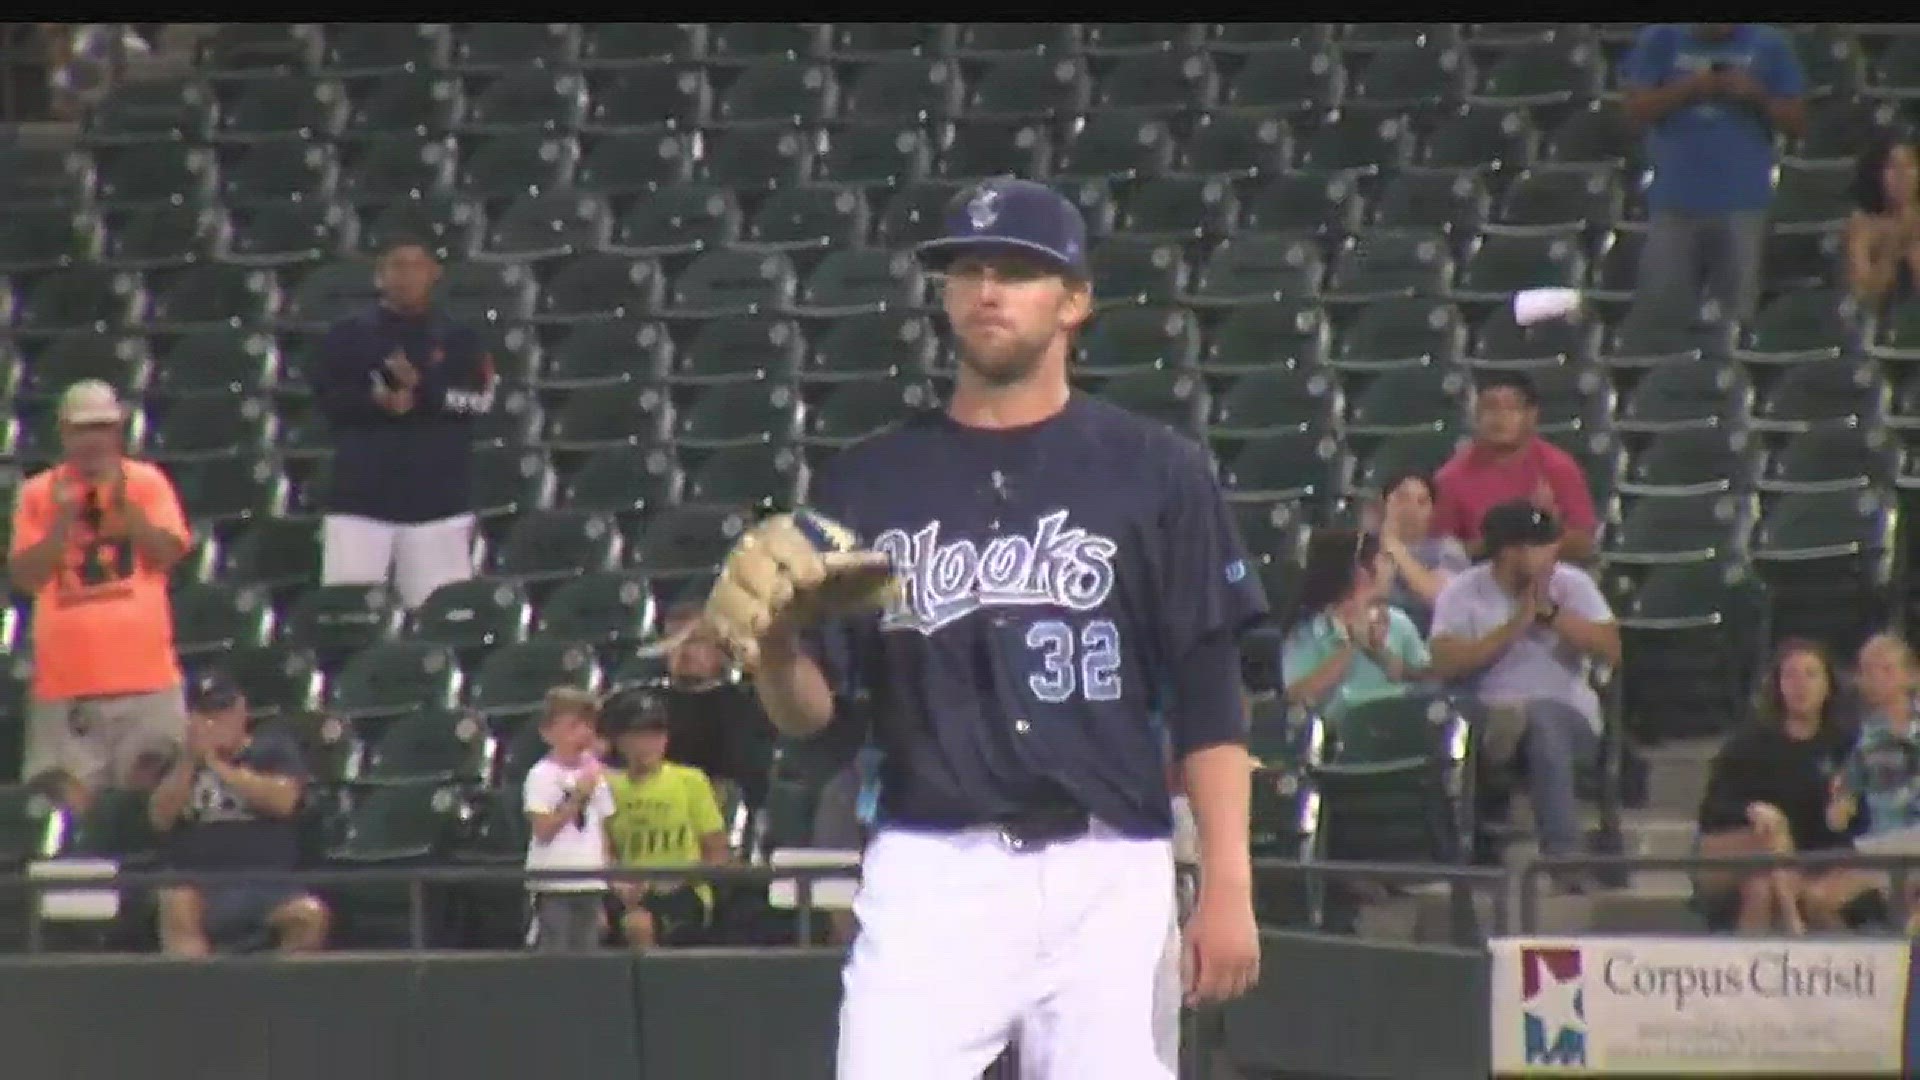 The Corpus Christi right-hander threw 8 2/3 innings of no-hit ball before losing it on a single by Frisco's Andy Ibanez.